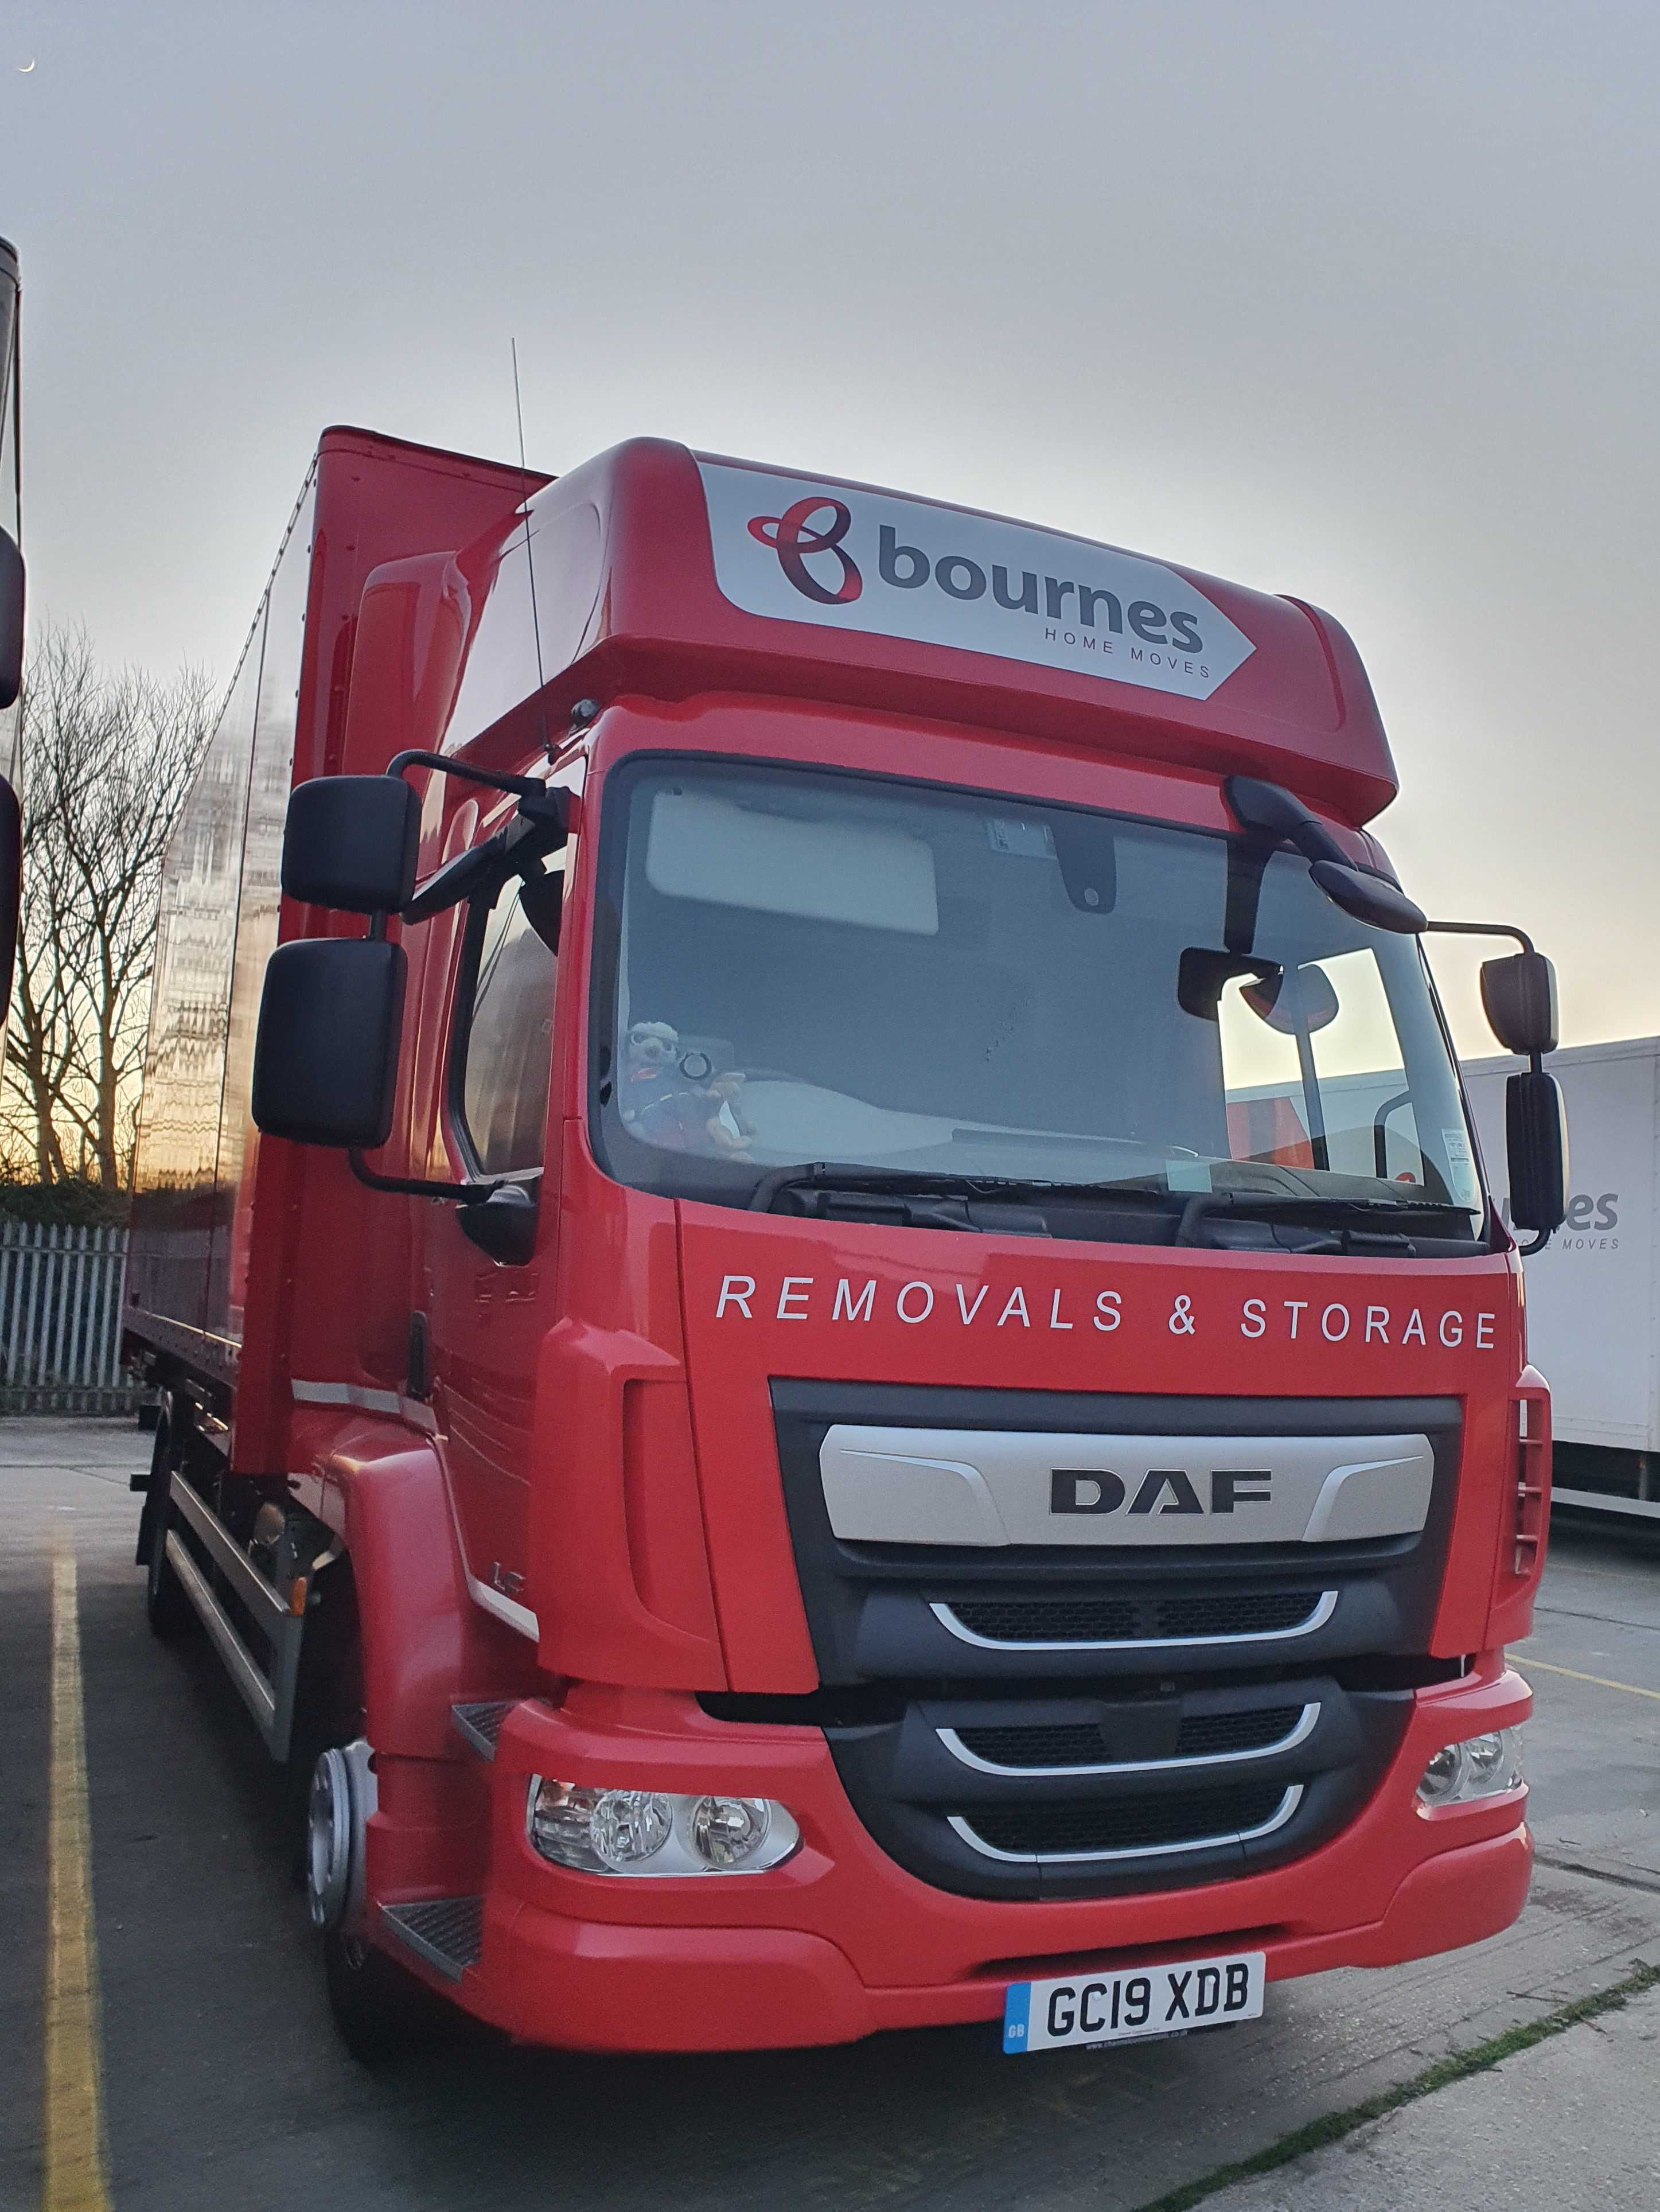 Bournes new red removals lorry from the front